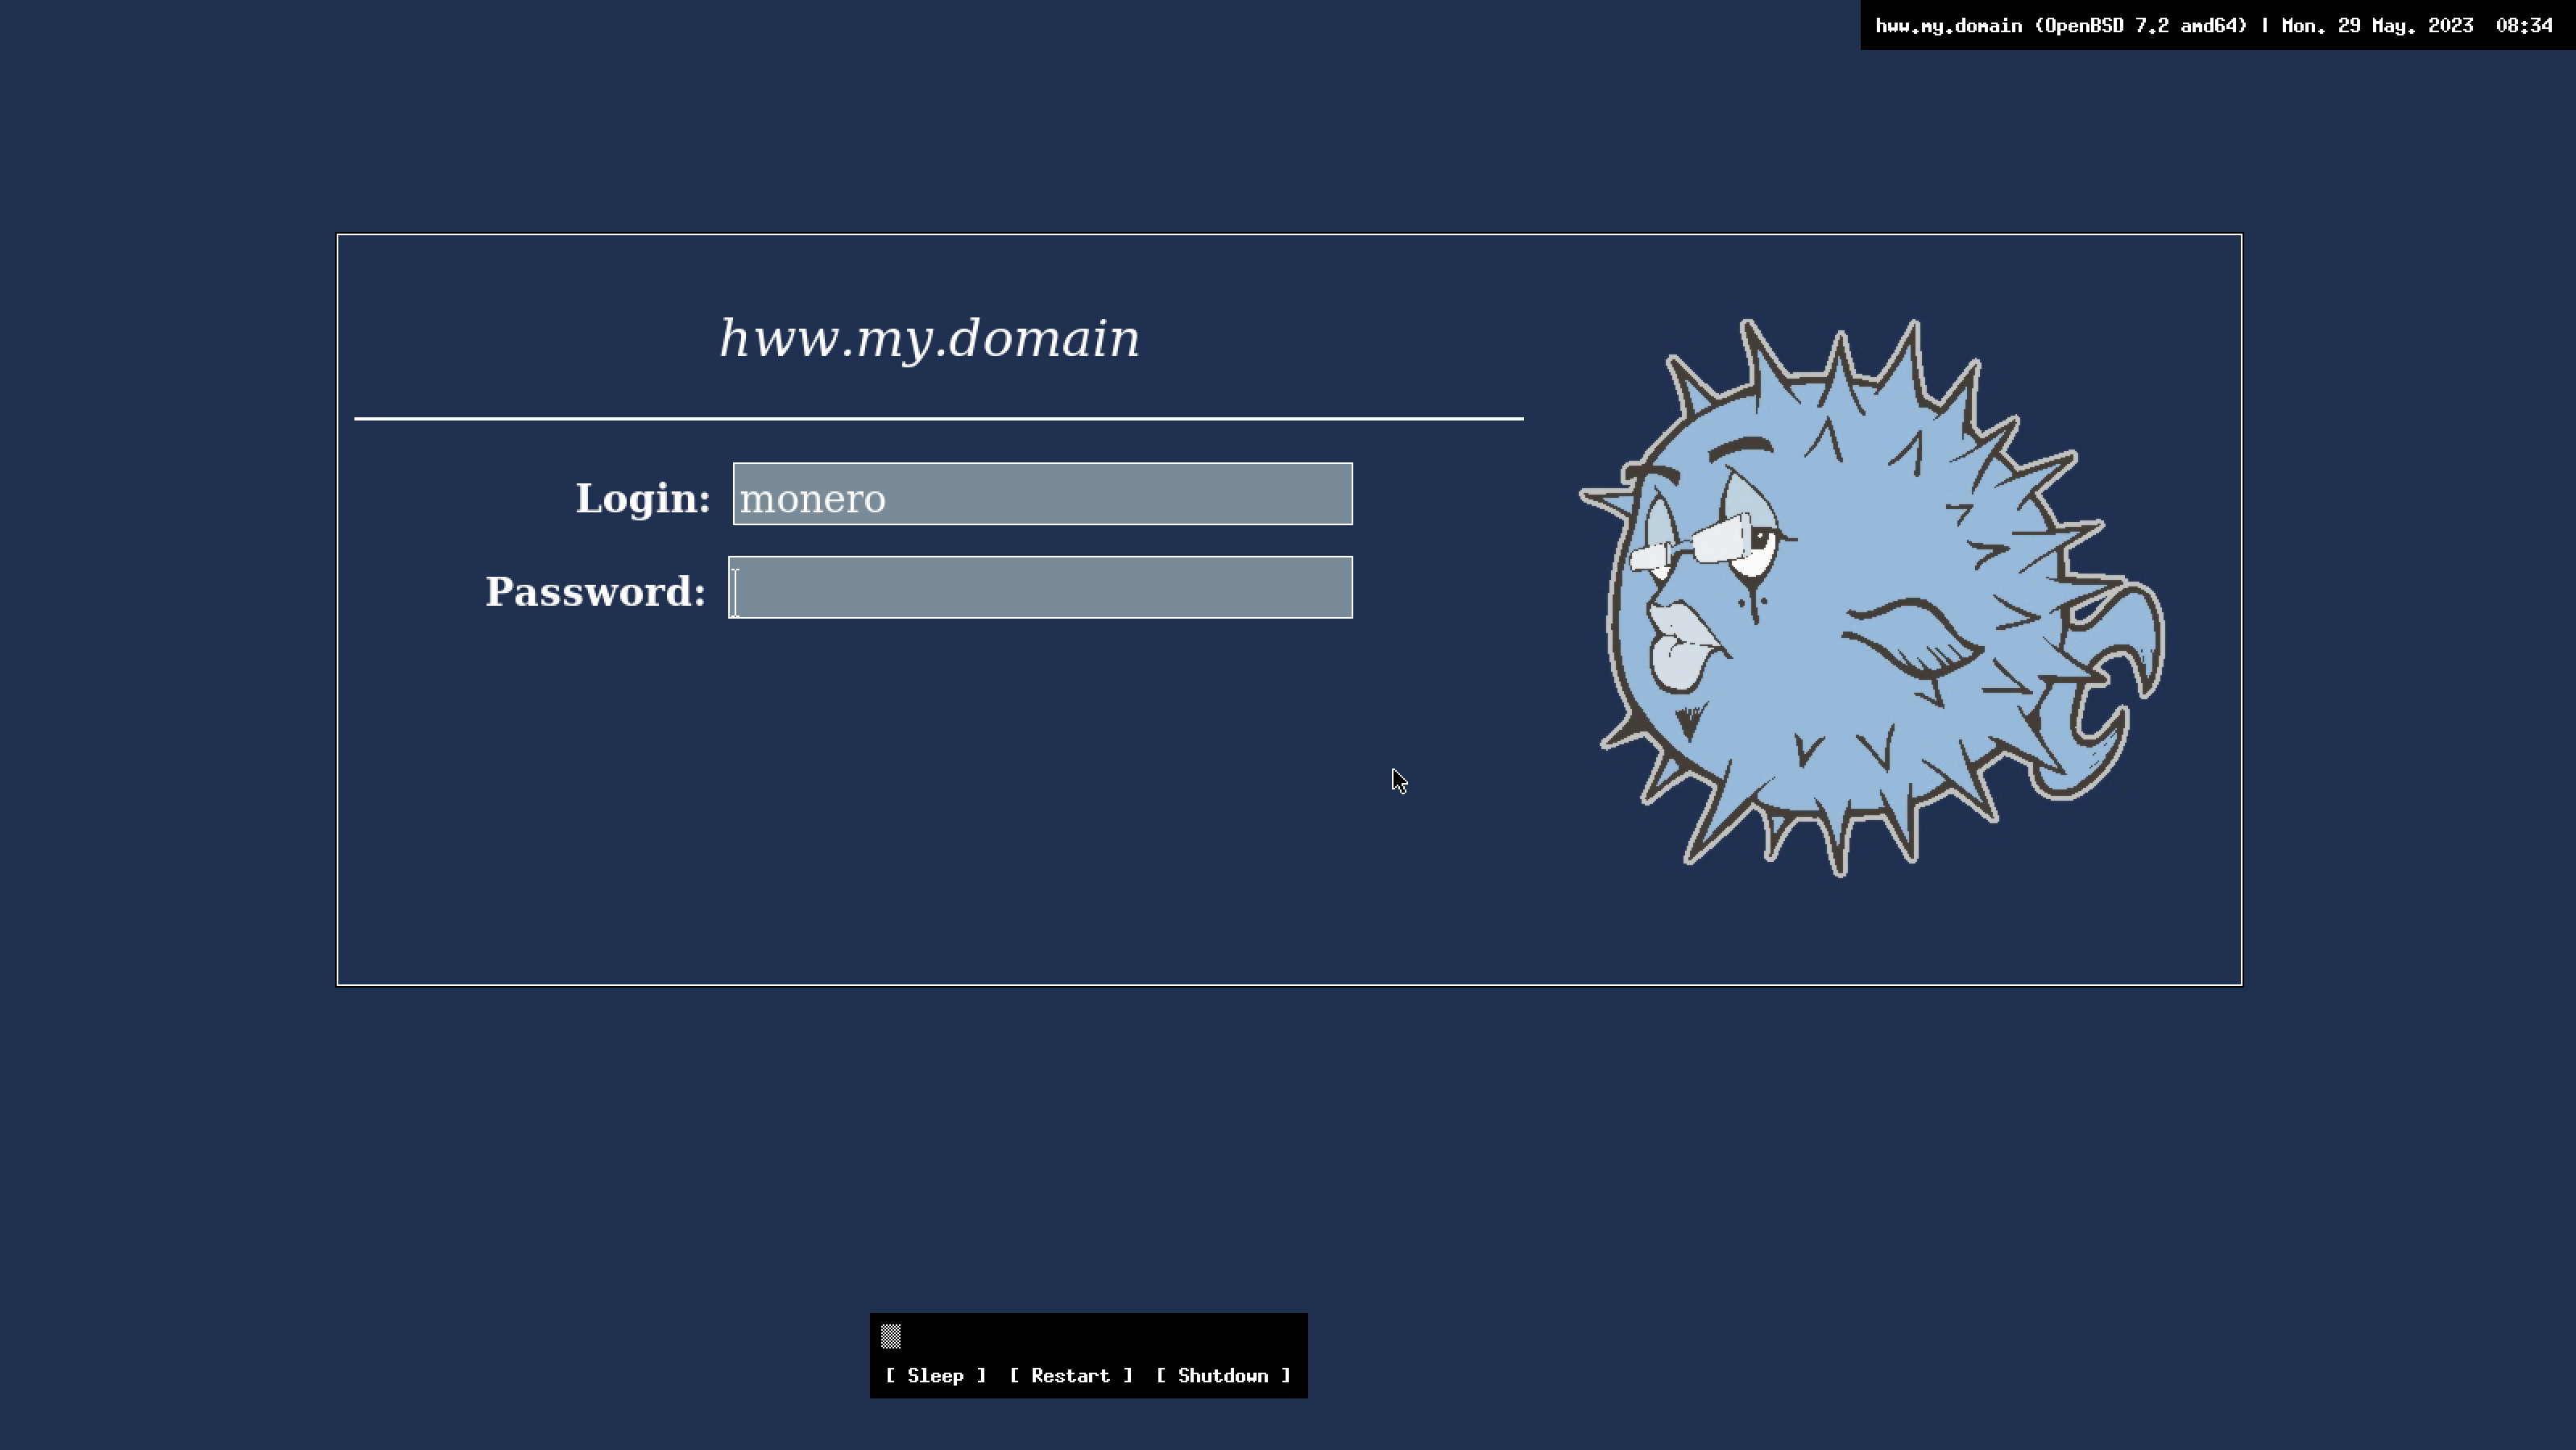 OpenHWW: OpenBSD xenodm login. Type your username and password to login into a system